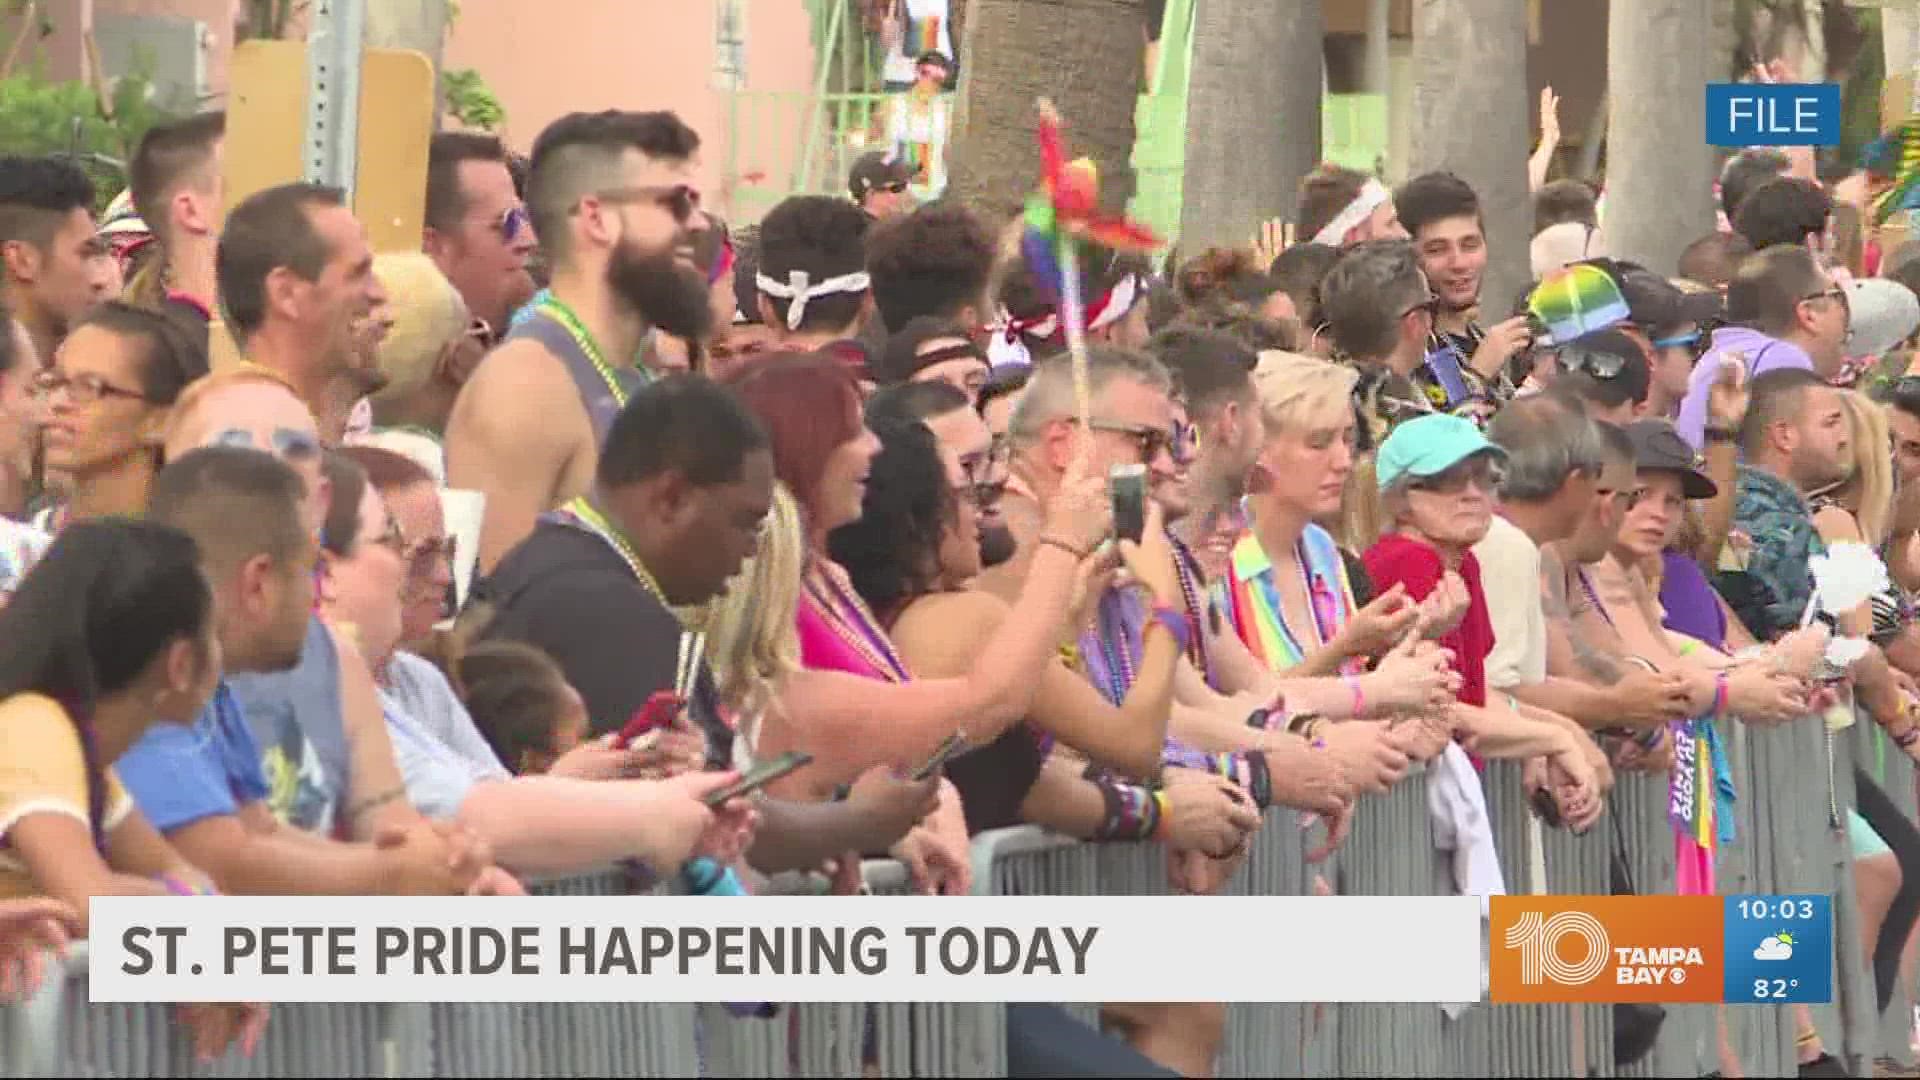 Hundreds of thousands of people are expected to attend some of the pride events in St. Pete this weekend.